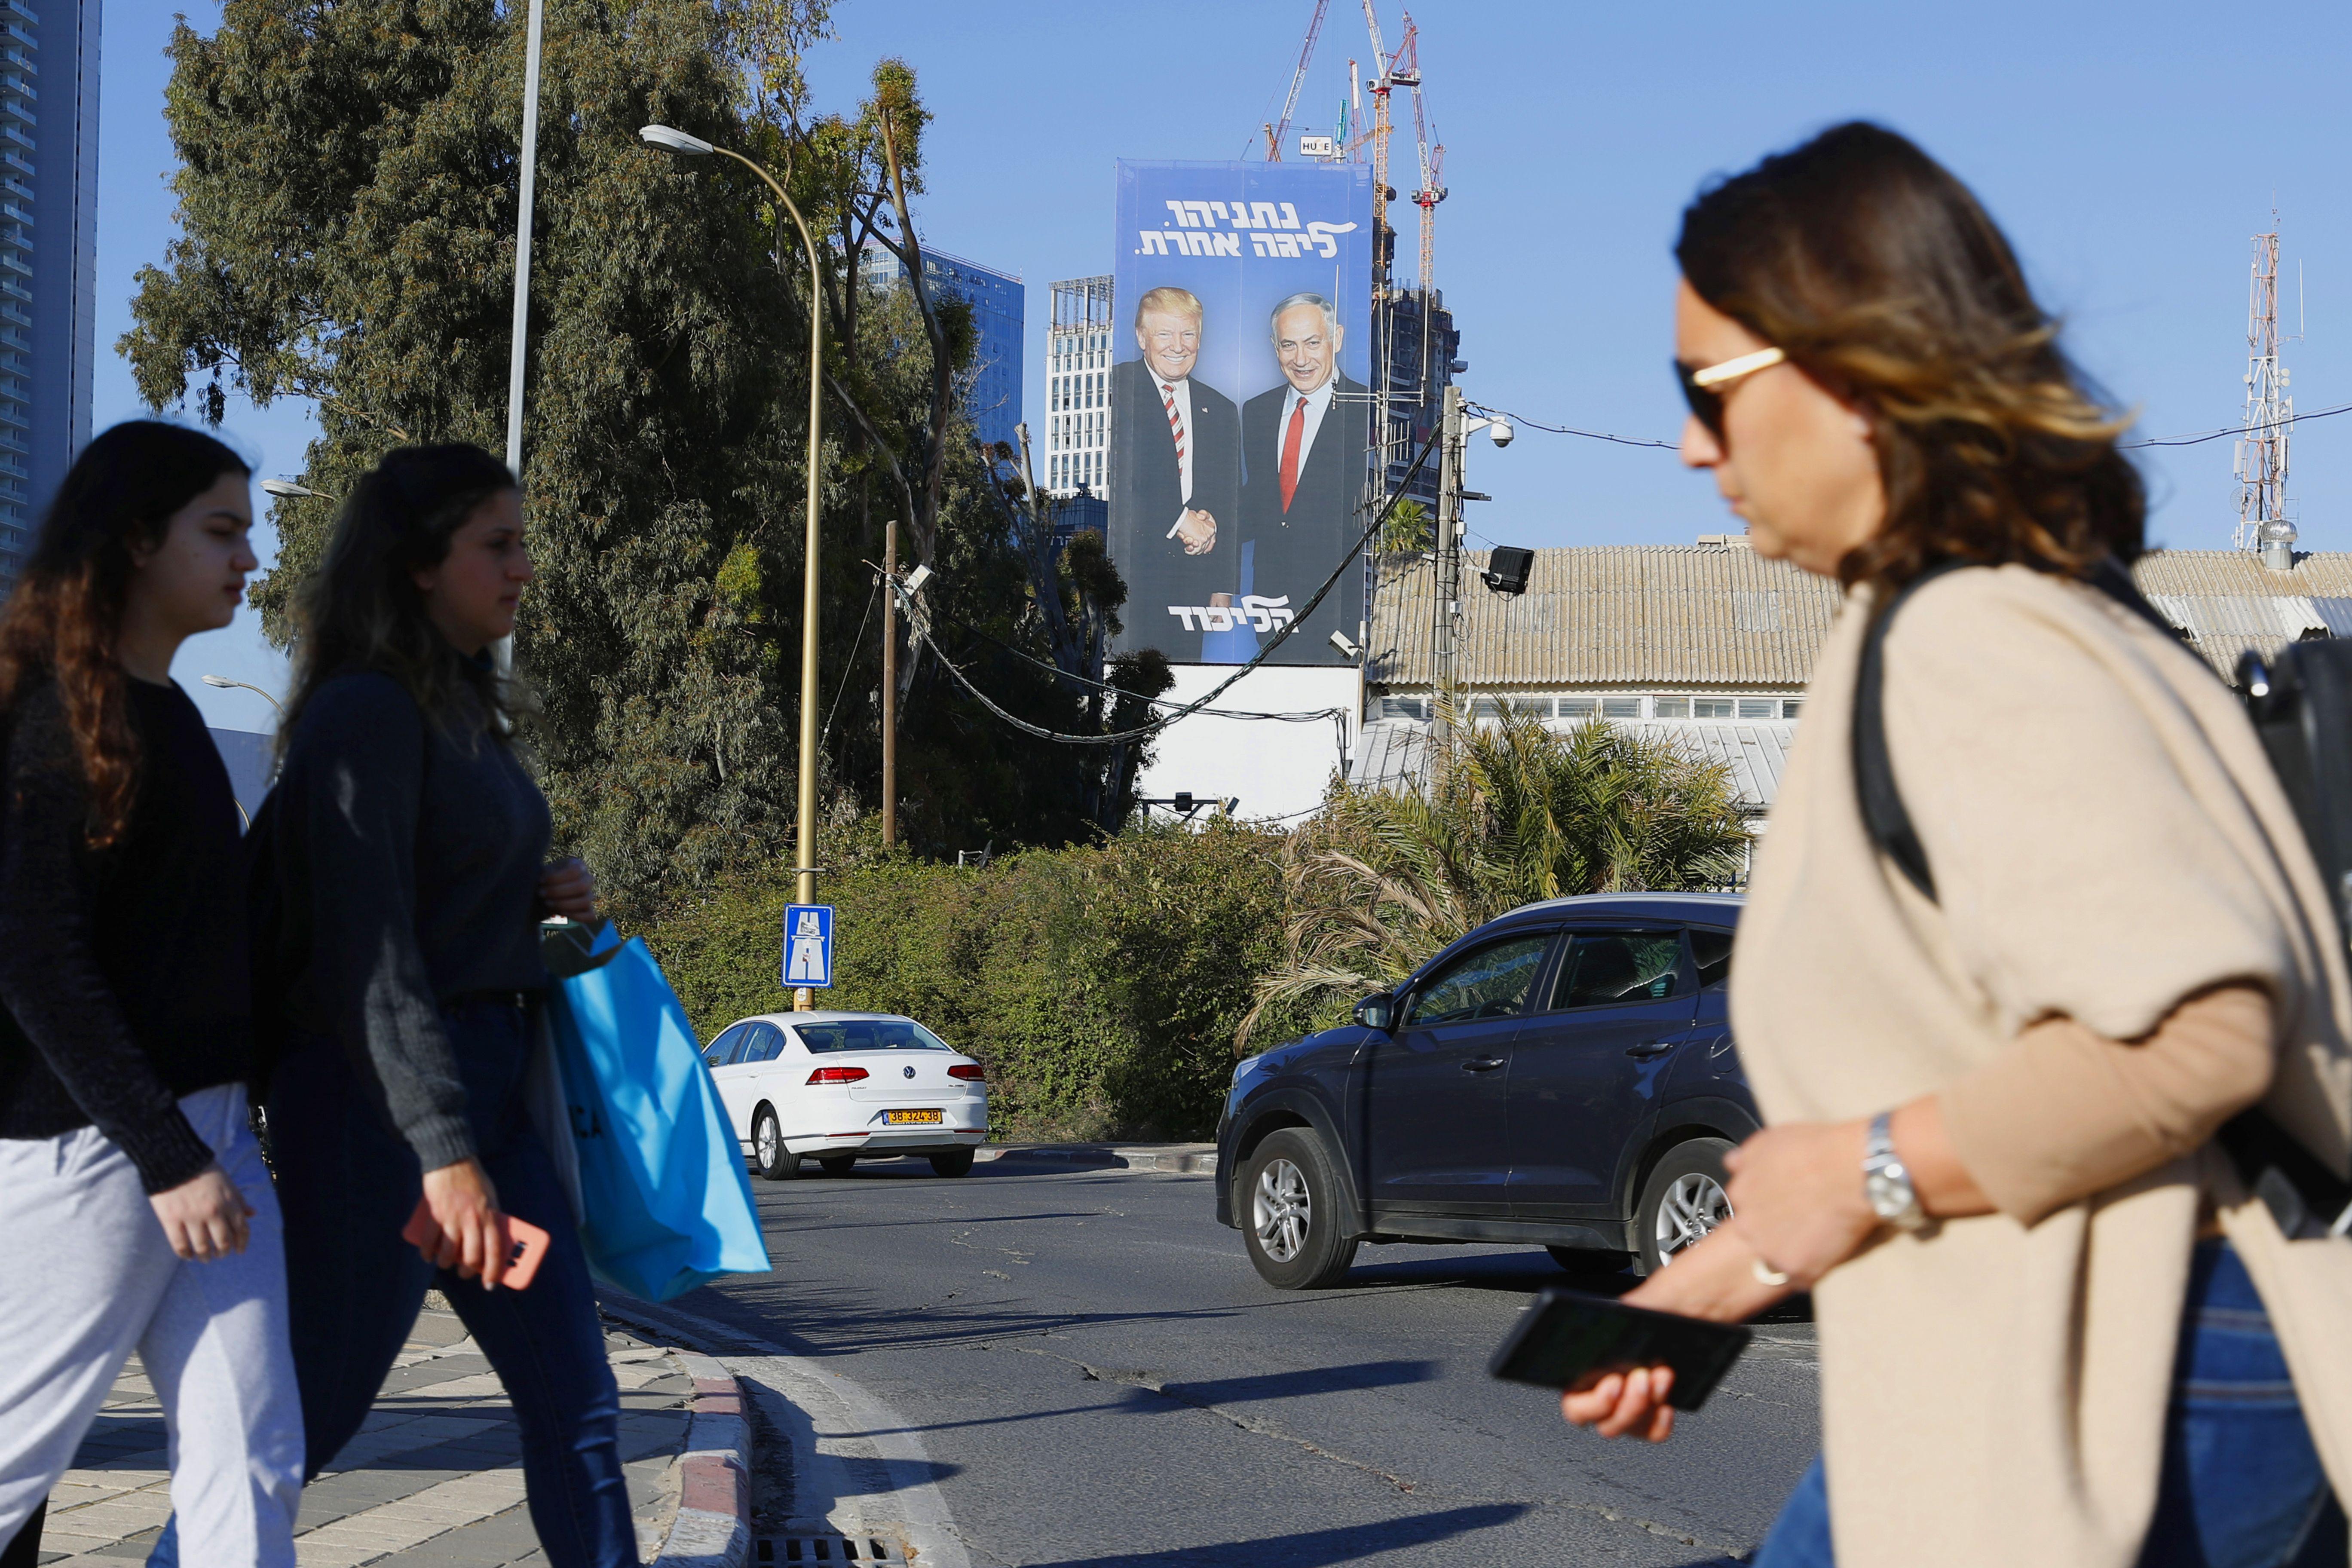 Pedestrians cross a street in front of a giant election billboard showing Israeli Prime Minister Benjamin Netanyahu and U.S. President Donald Trump shaking hands, in the Israeli coastal city of Tel Aviv on Feb. 3